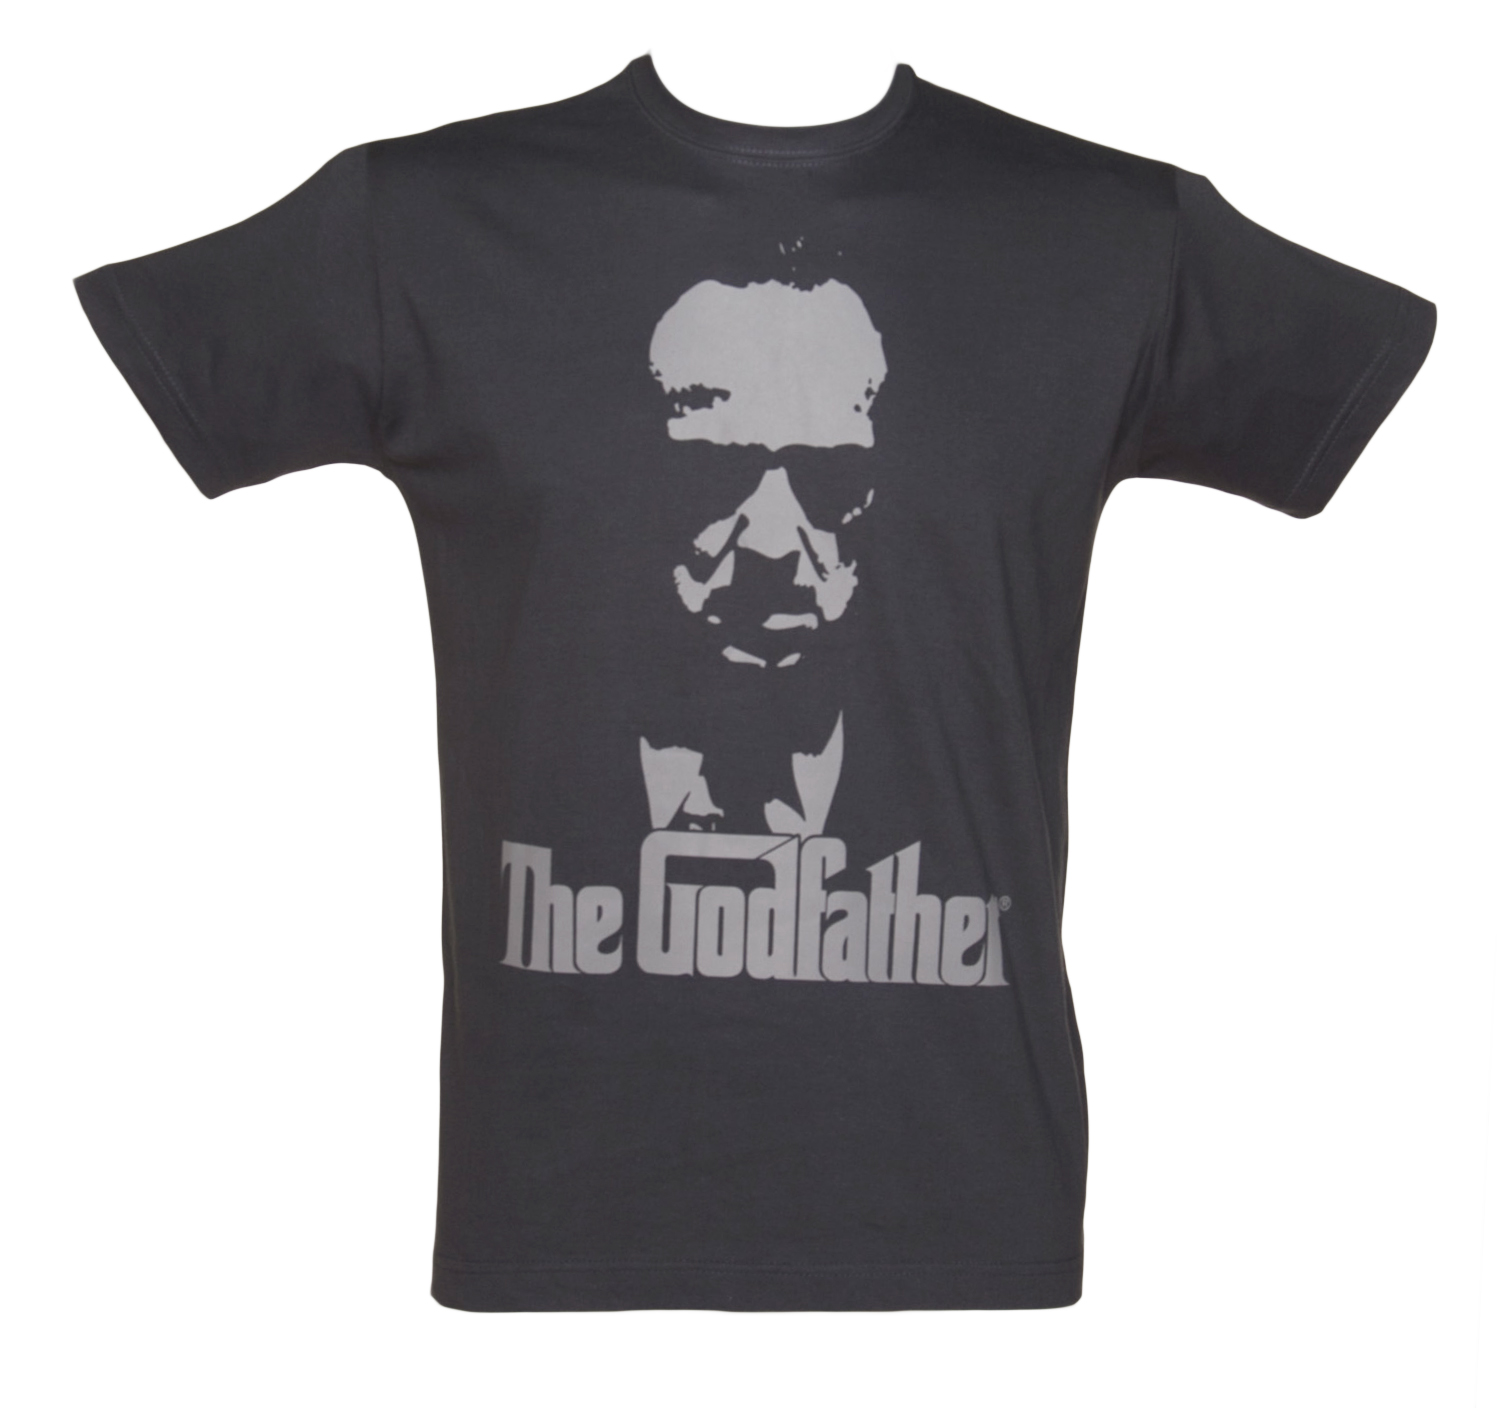 Mens Charcoal Godfather Poster T-Shirt